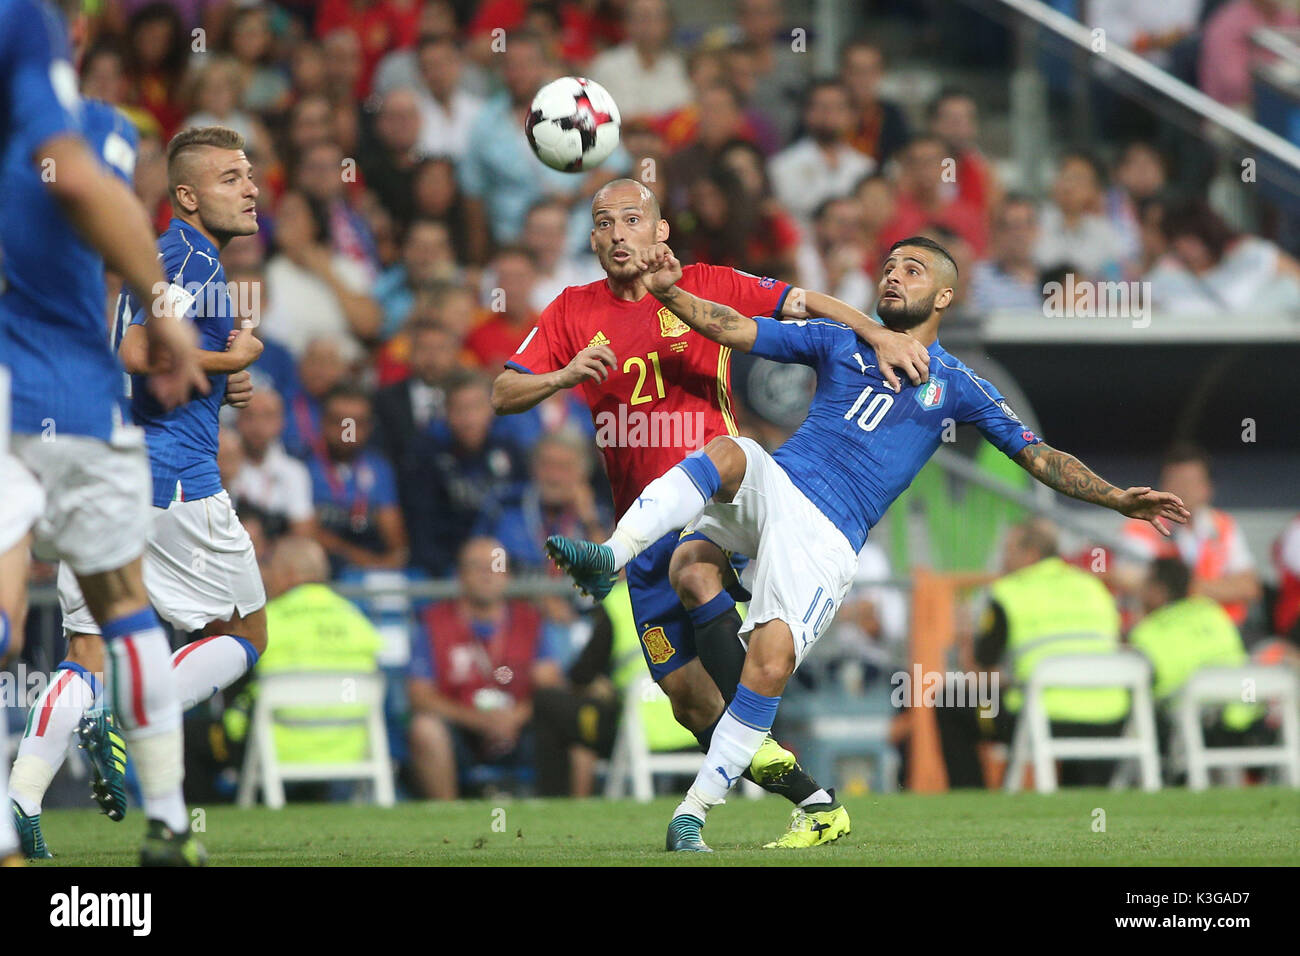 Madrid, Spain. 2nd September, 2017. FIFA 2018 World Cup Qualifier. Group G. Match between Spain vs Italy. David Silva and Insigne in action during the match. Credit: marco iacobucci/Alamy Live News Stock Photo